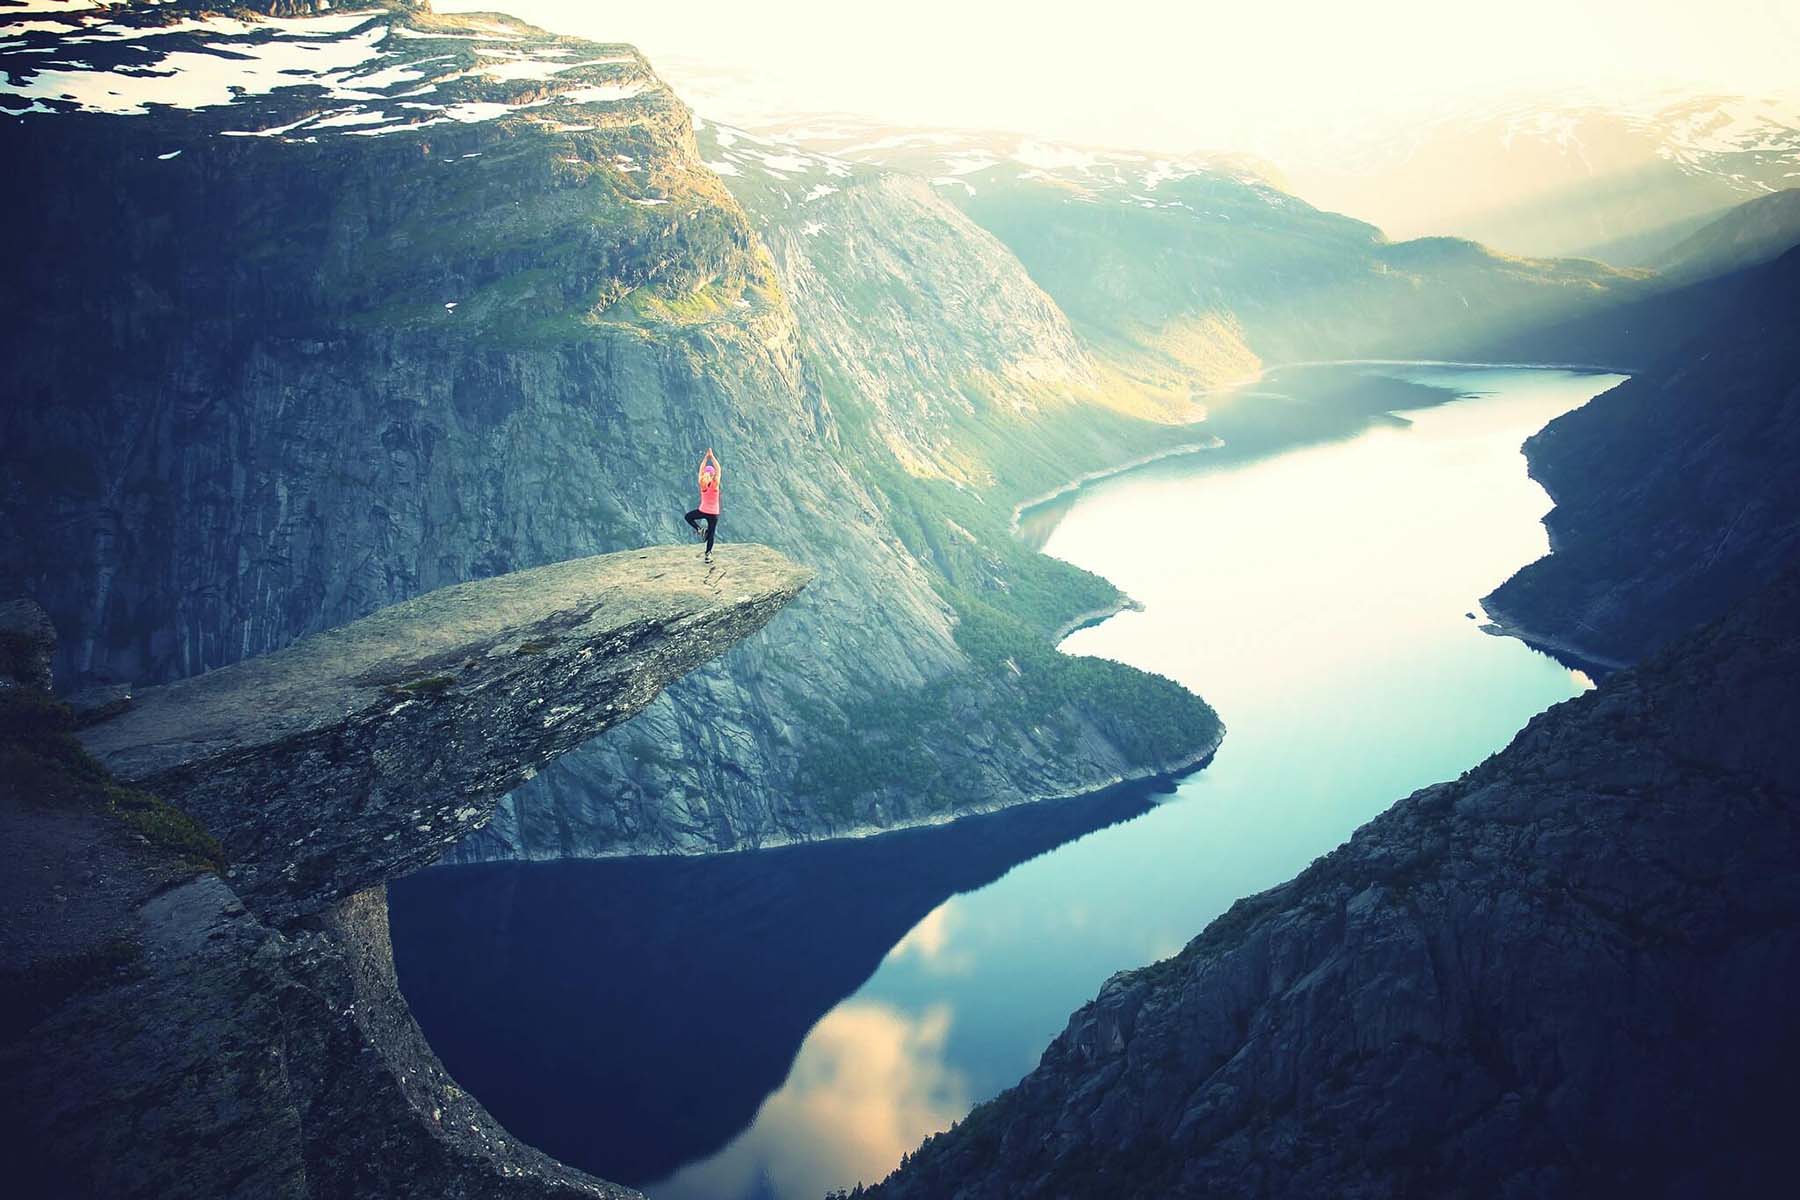 Woman doing YOGA on cliff stone looking over a mountain and a lake